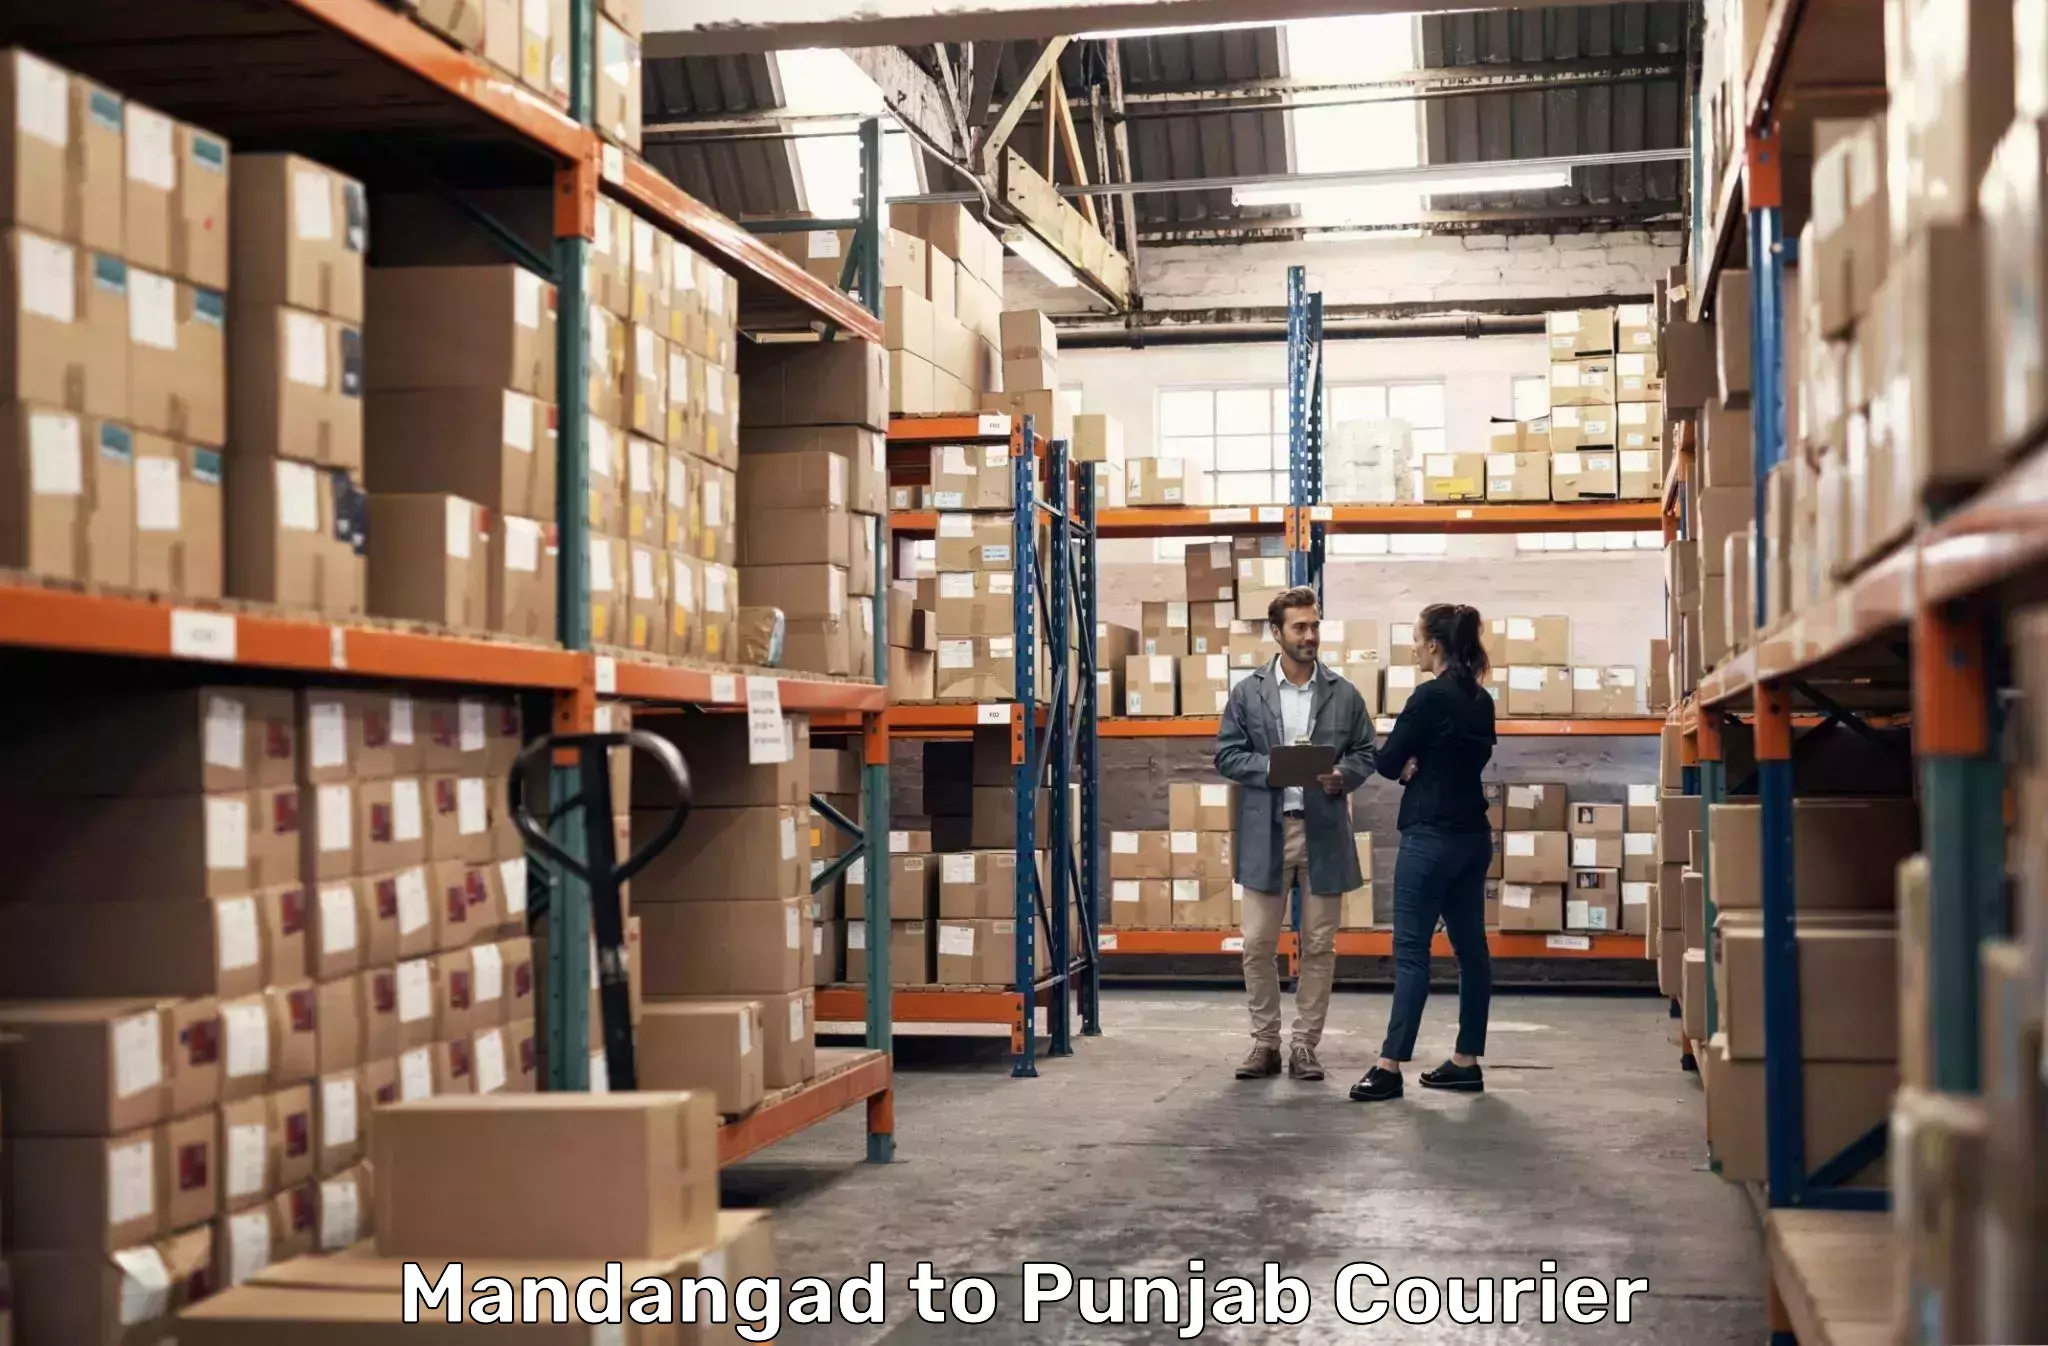 High-priority parcel service Mandangad to Firozpur